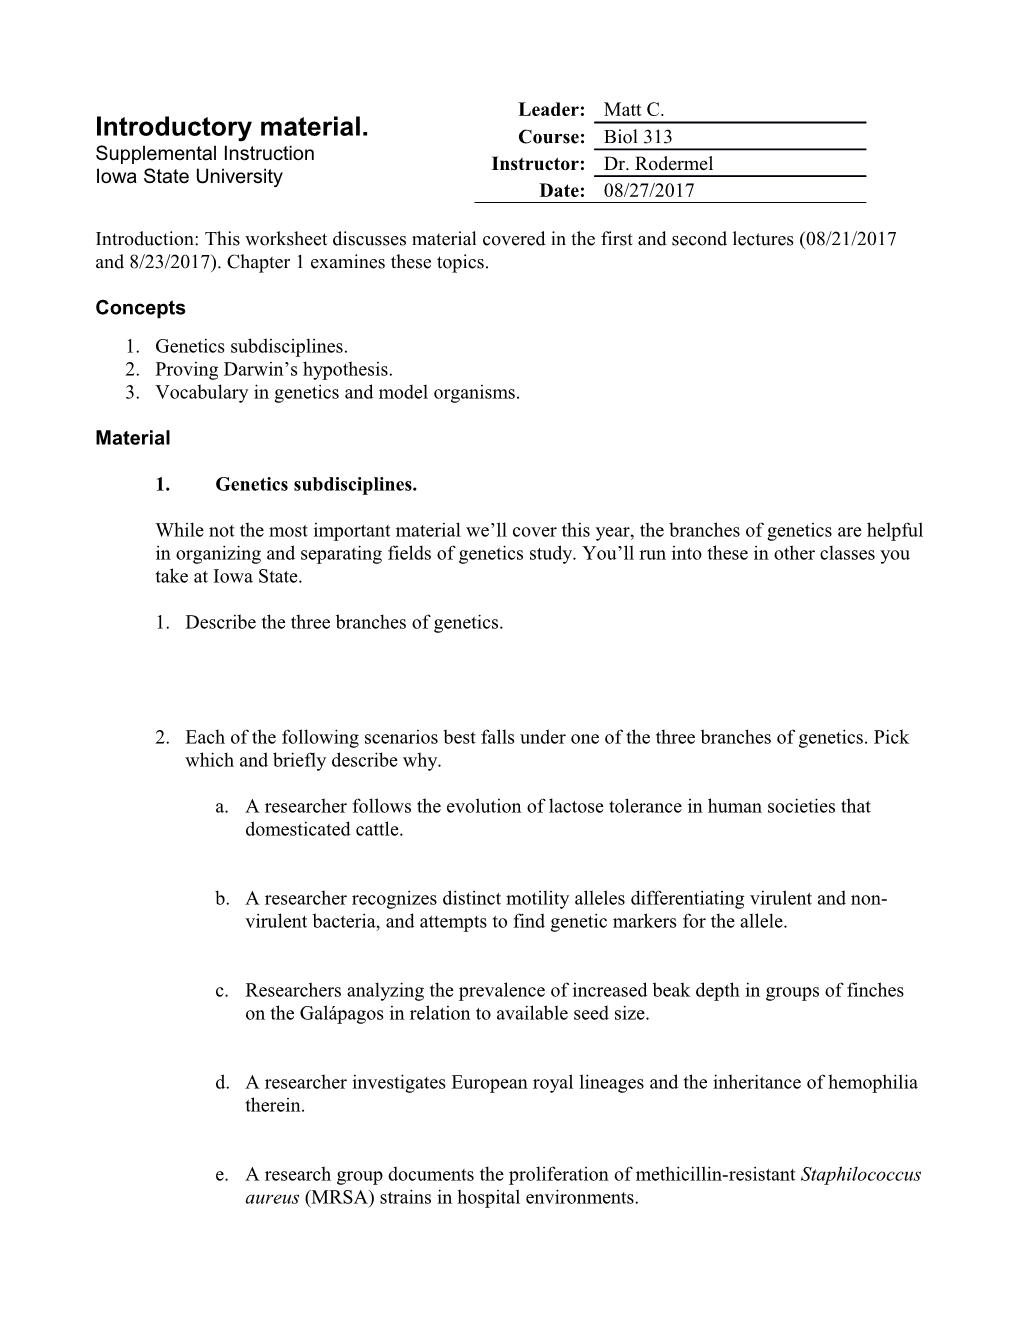 Introduction: This Worksheet Discusses Material Covered in the First And